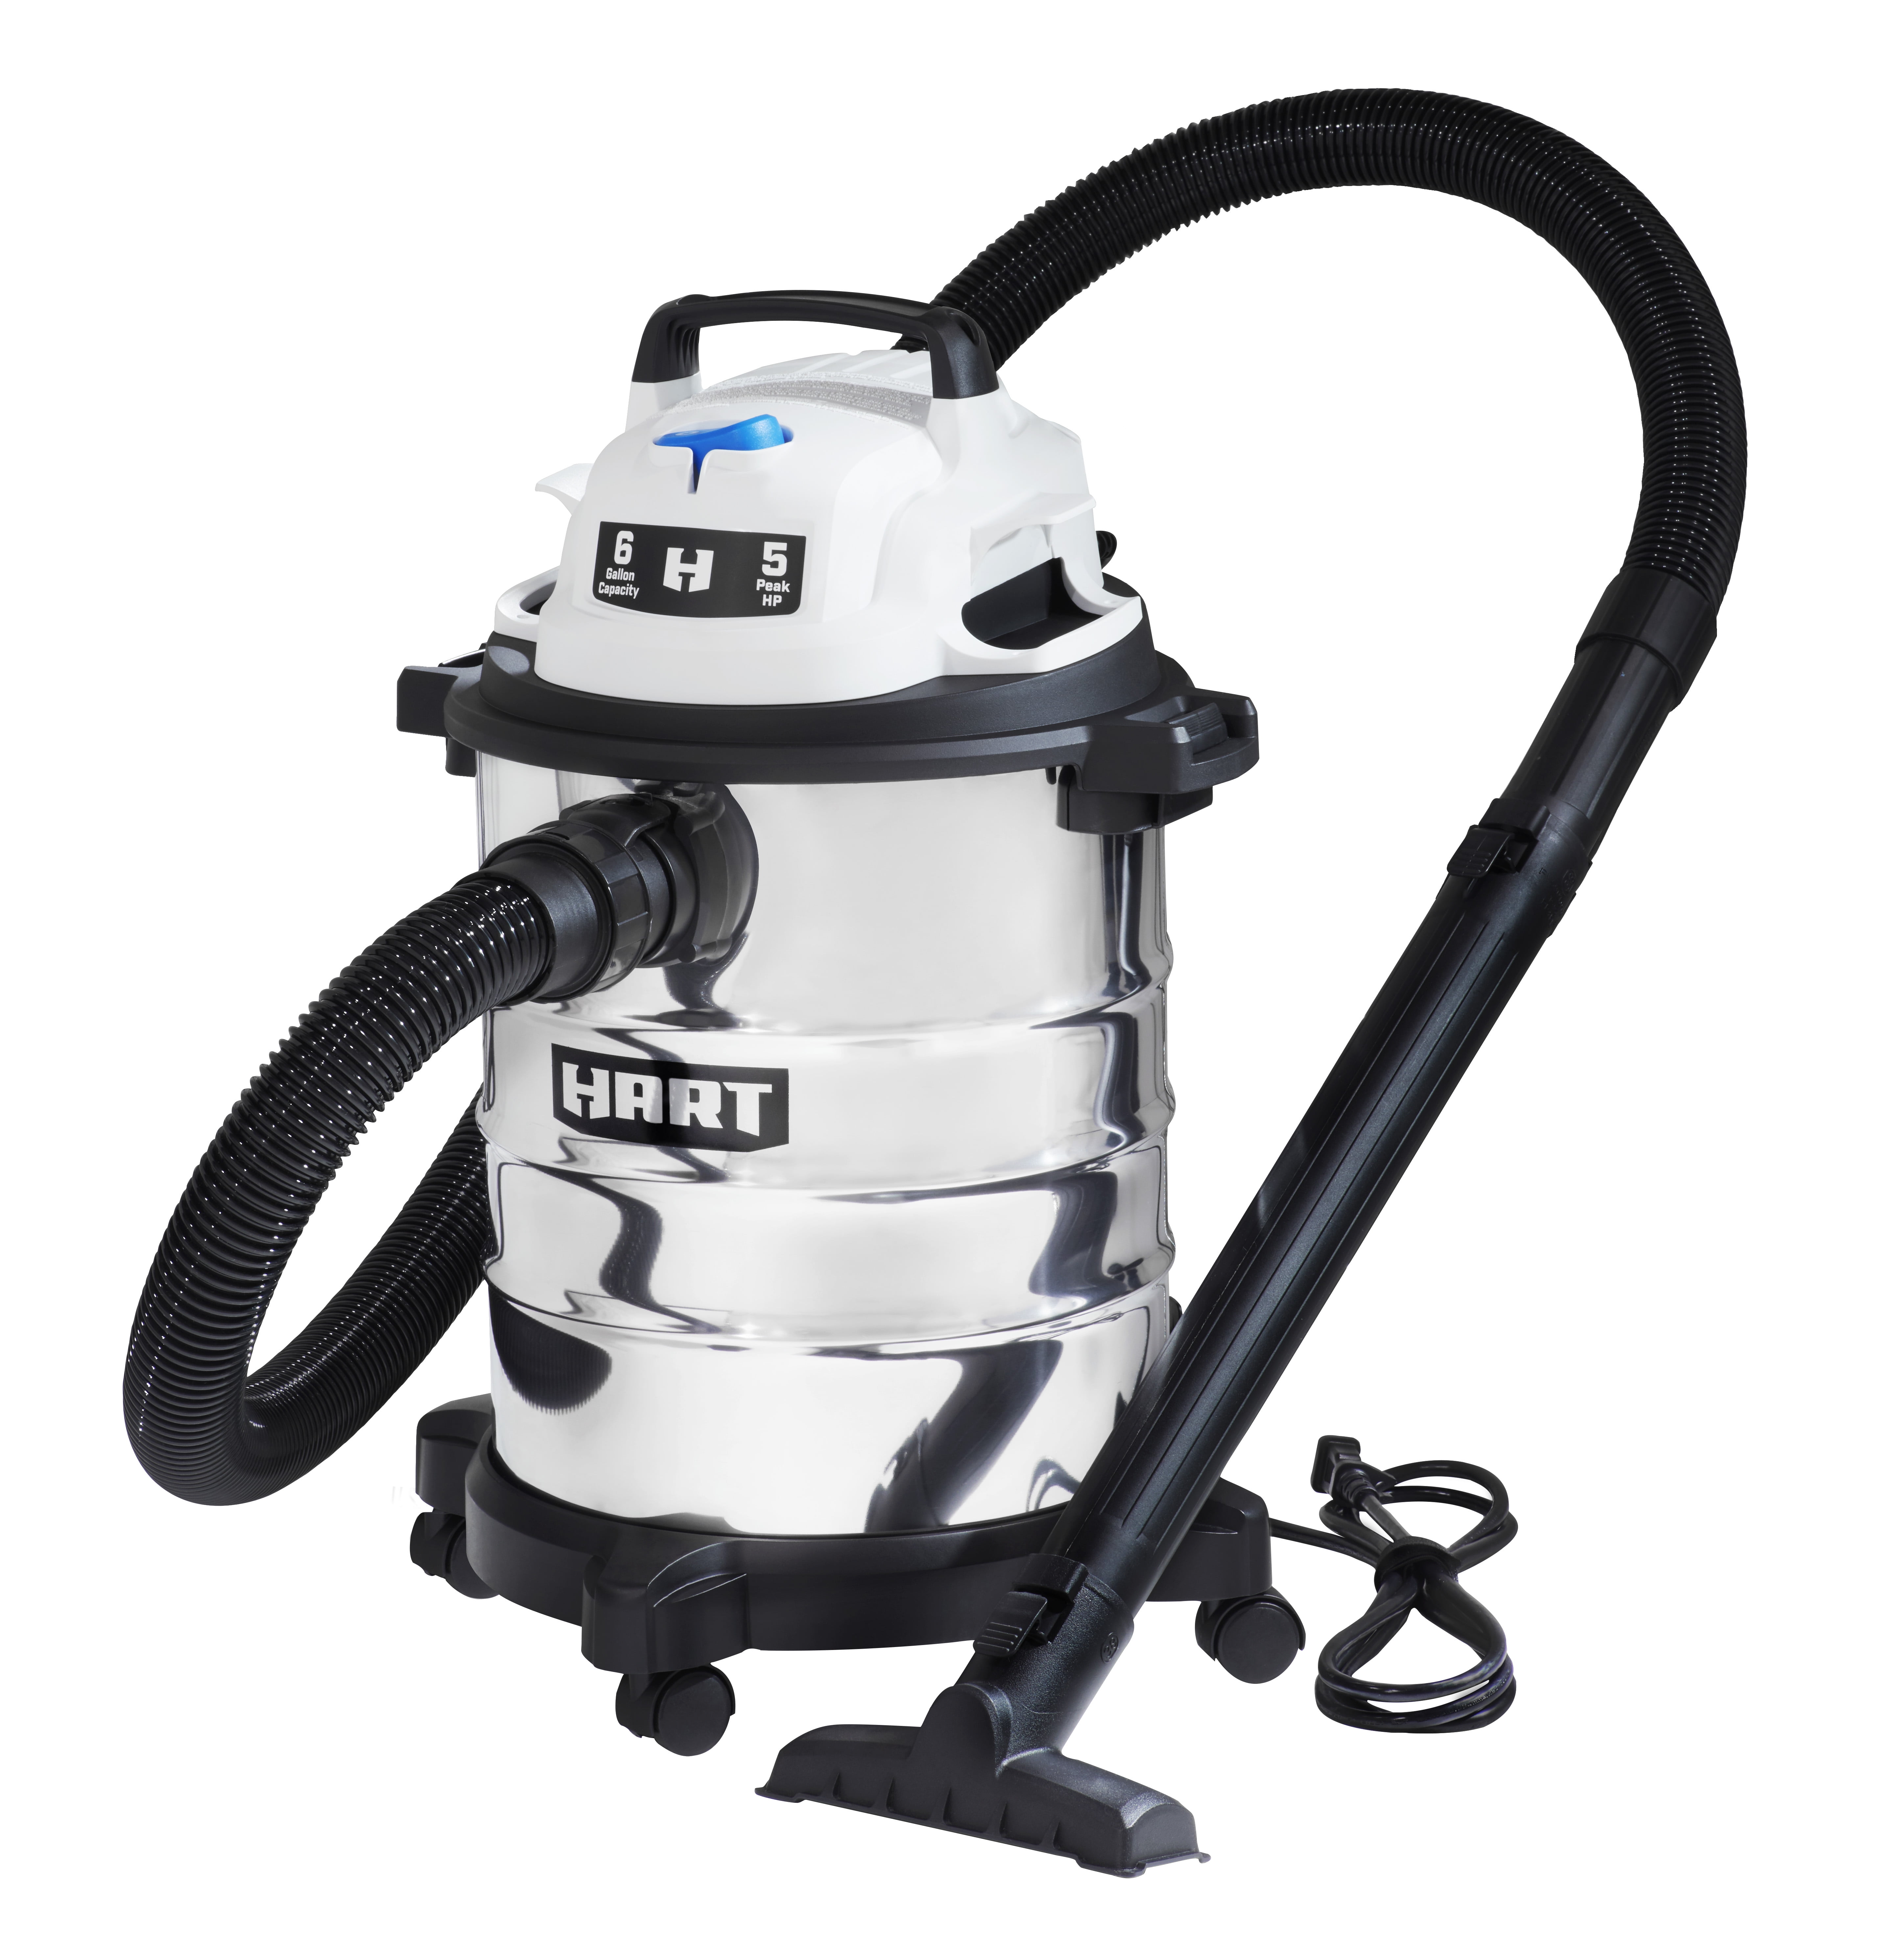 Parts  16 Gallon Stainless Steel Wet/Dry Shop Vac with Cart